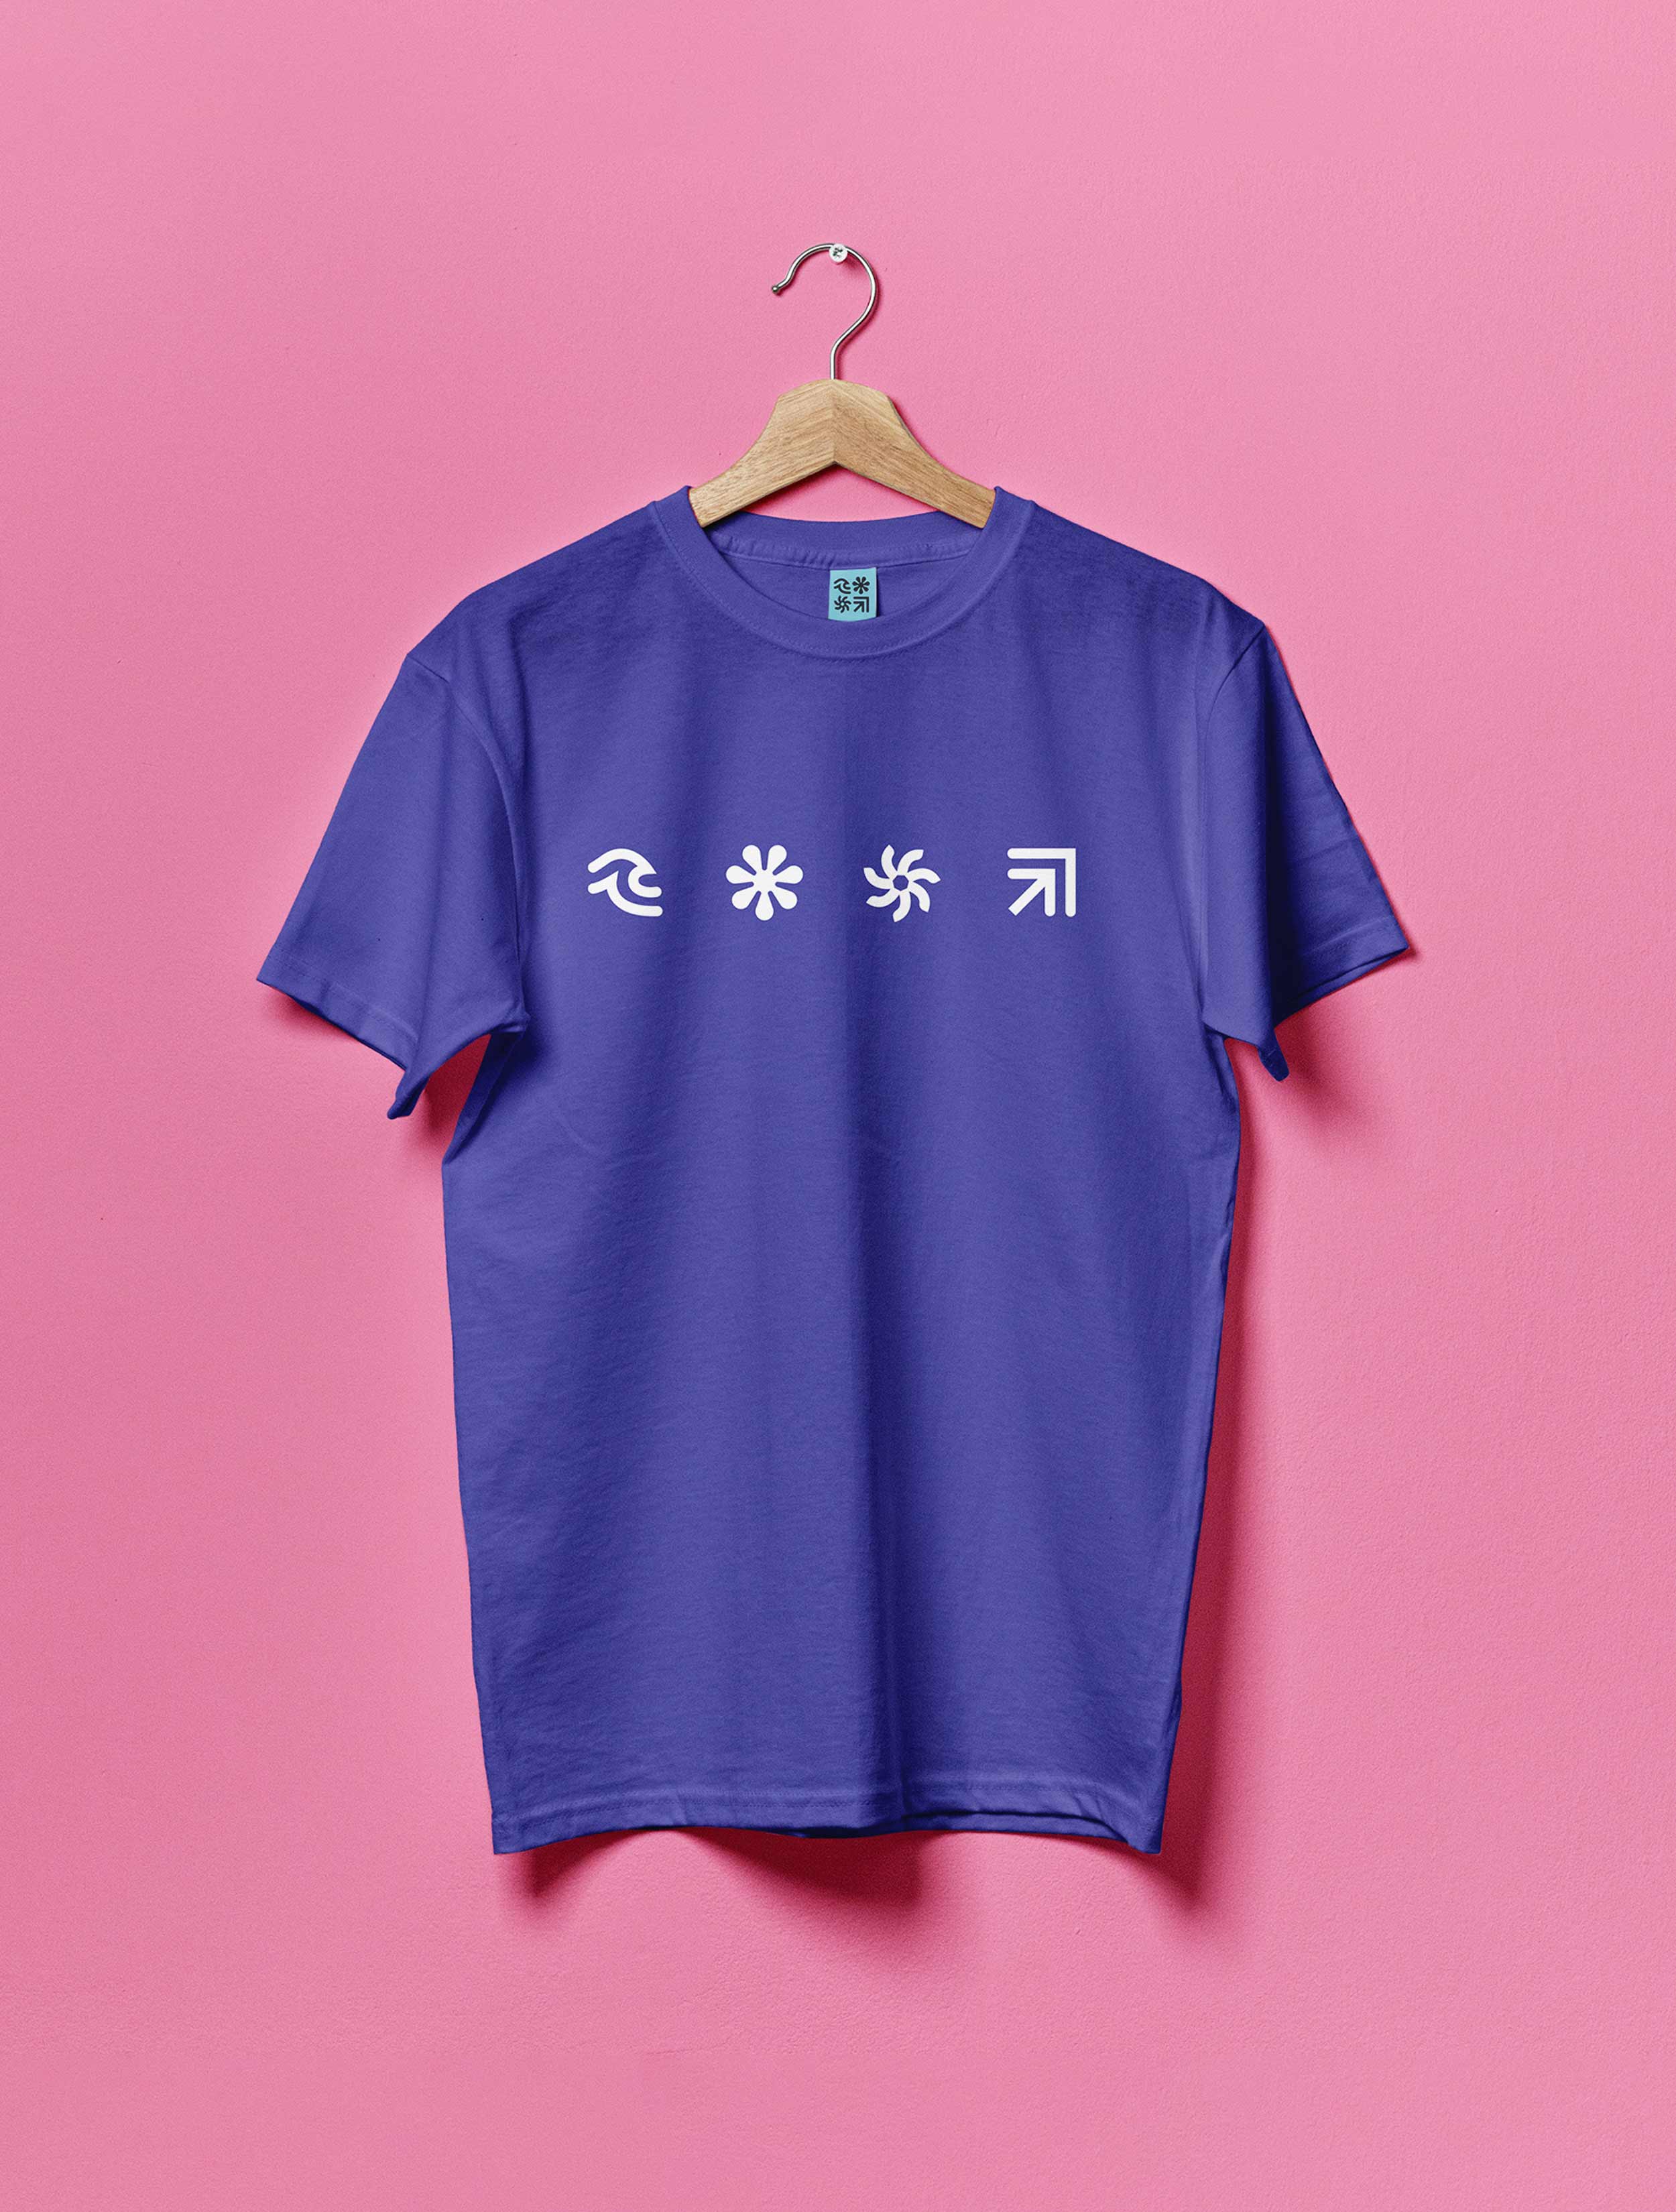 blue t shirt with icons